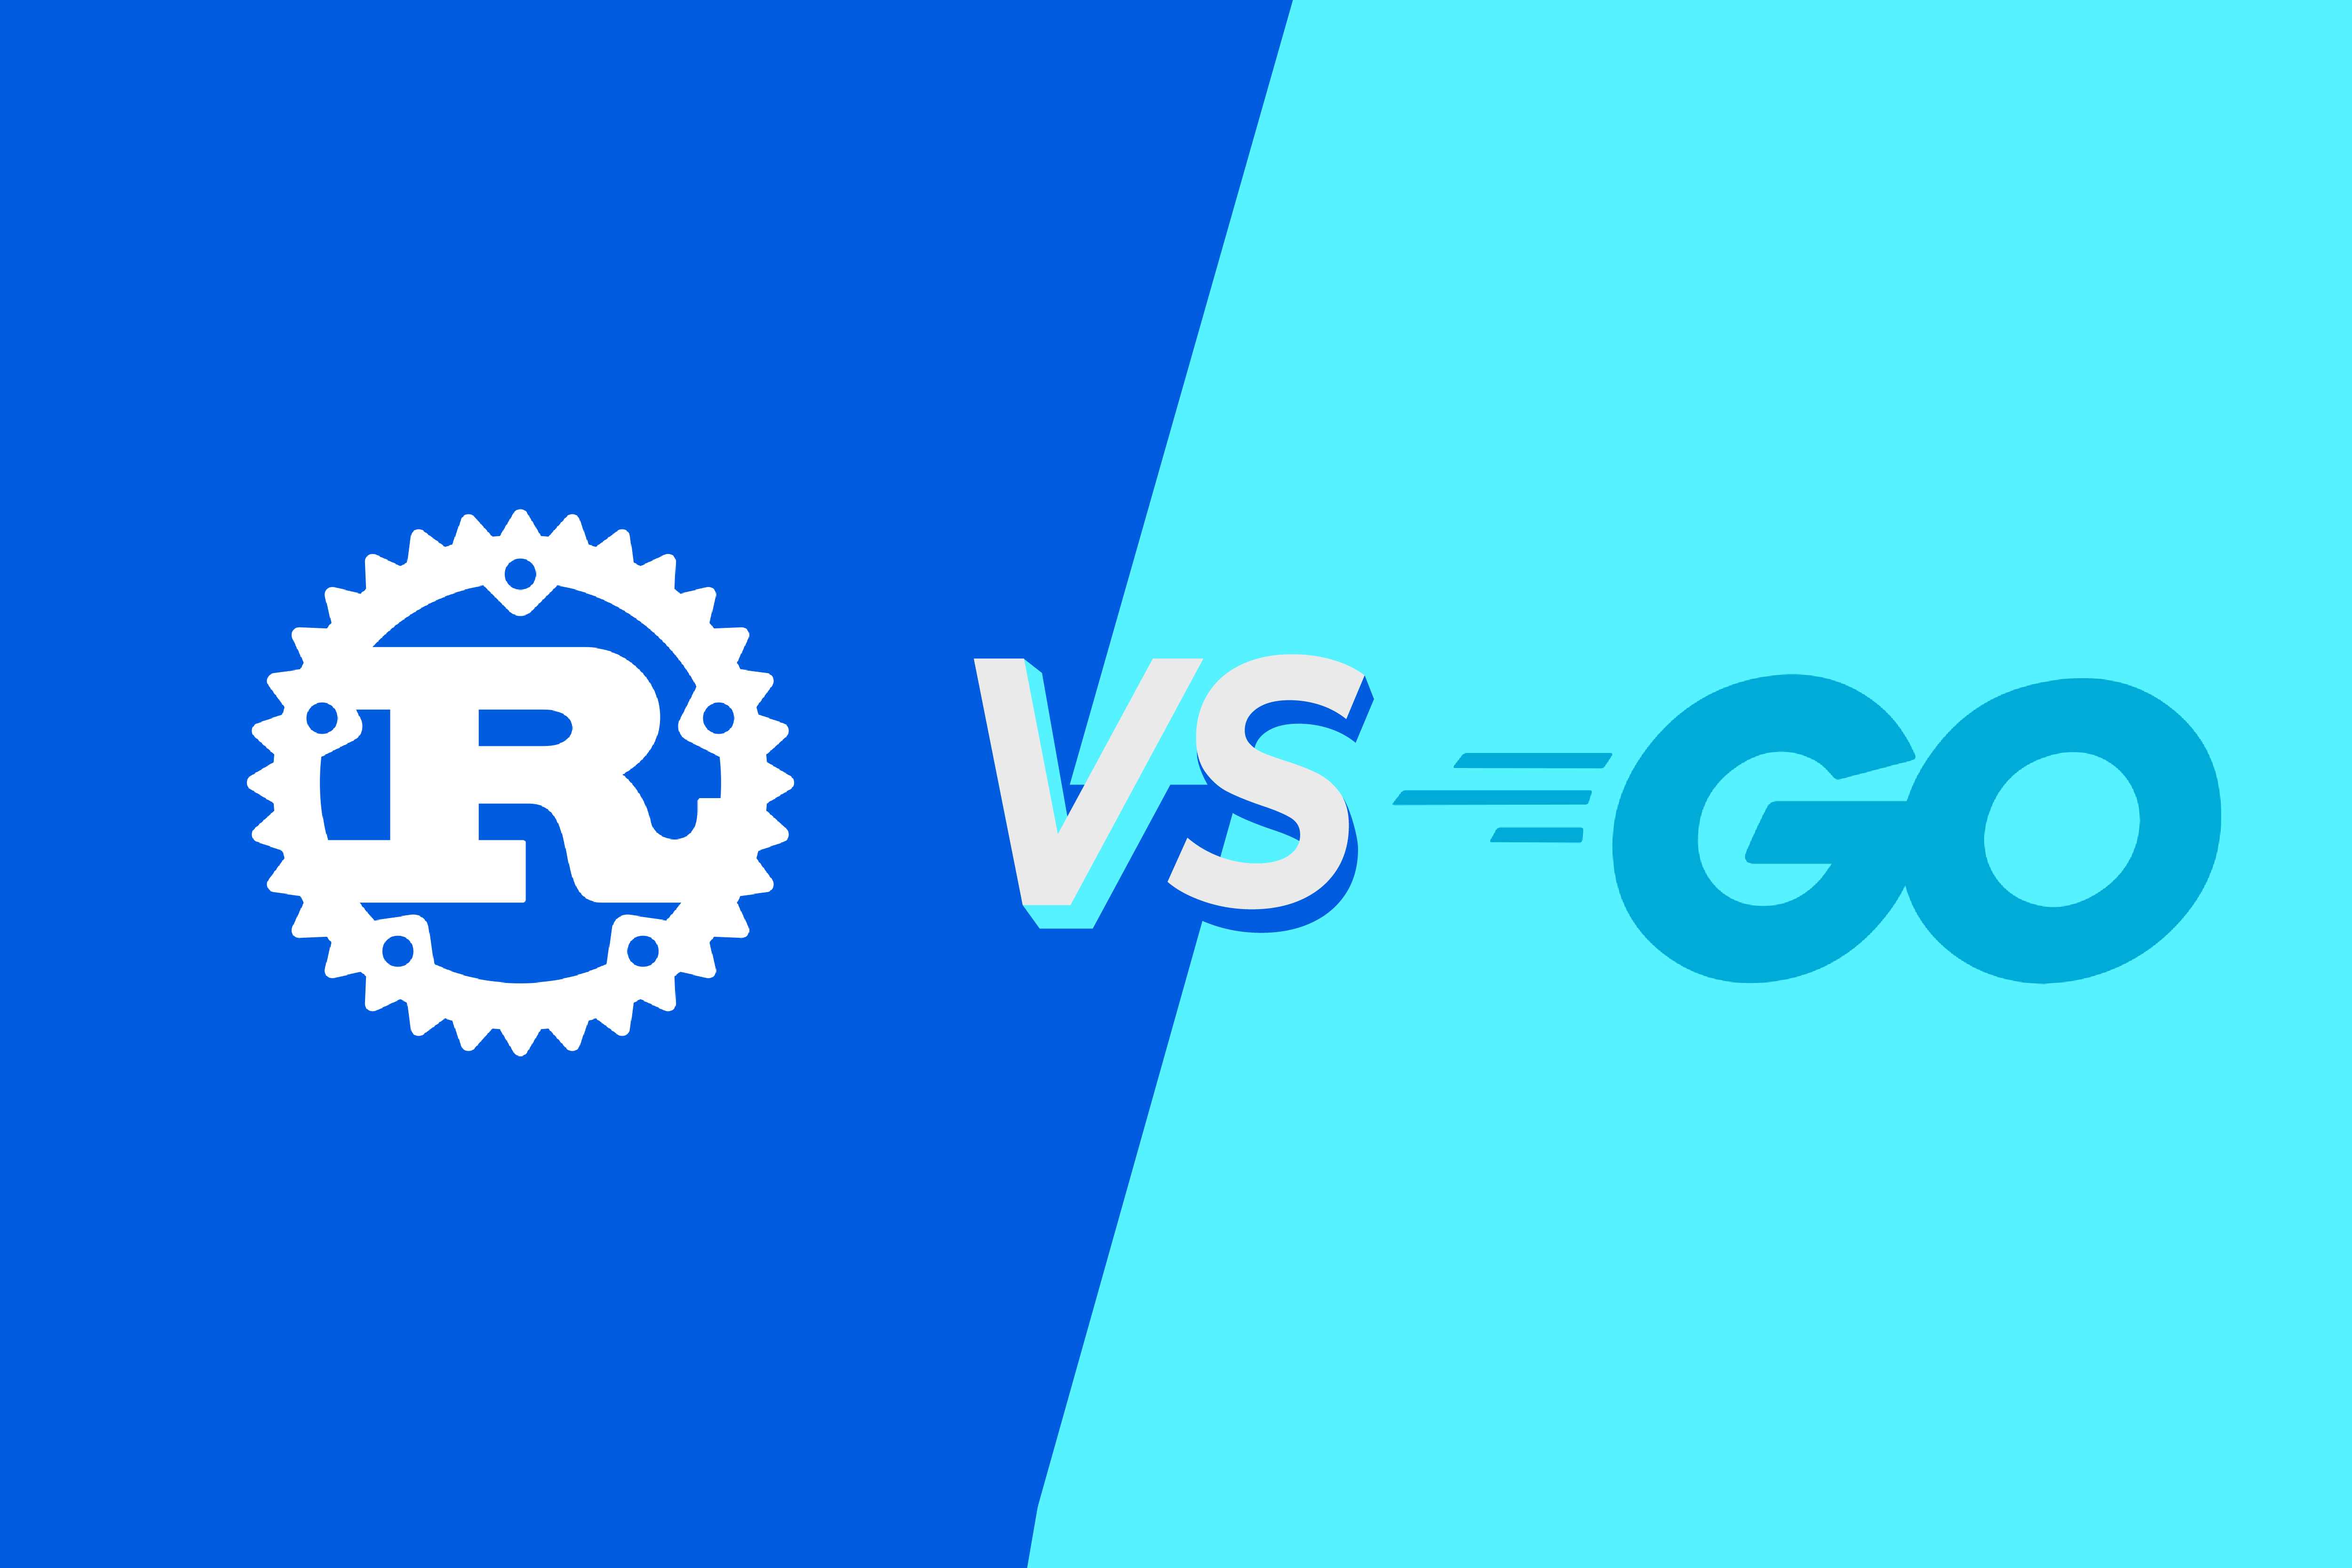 Rust Vs Go for Blockchain: What to Choose While Developing a Killer Blockchain App